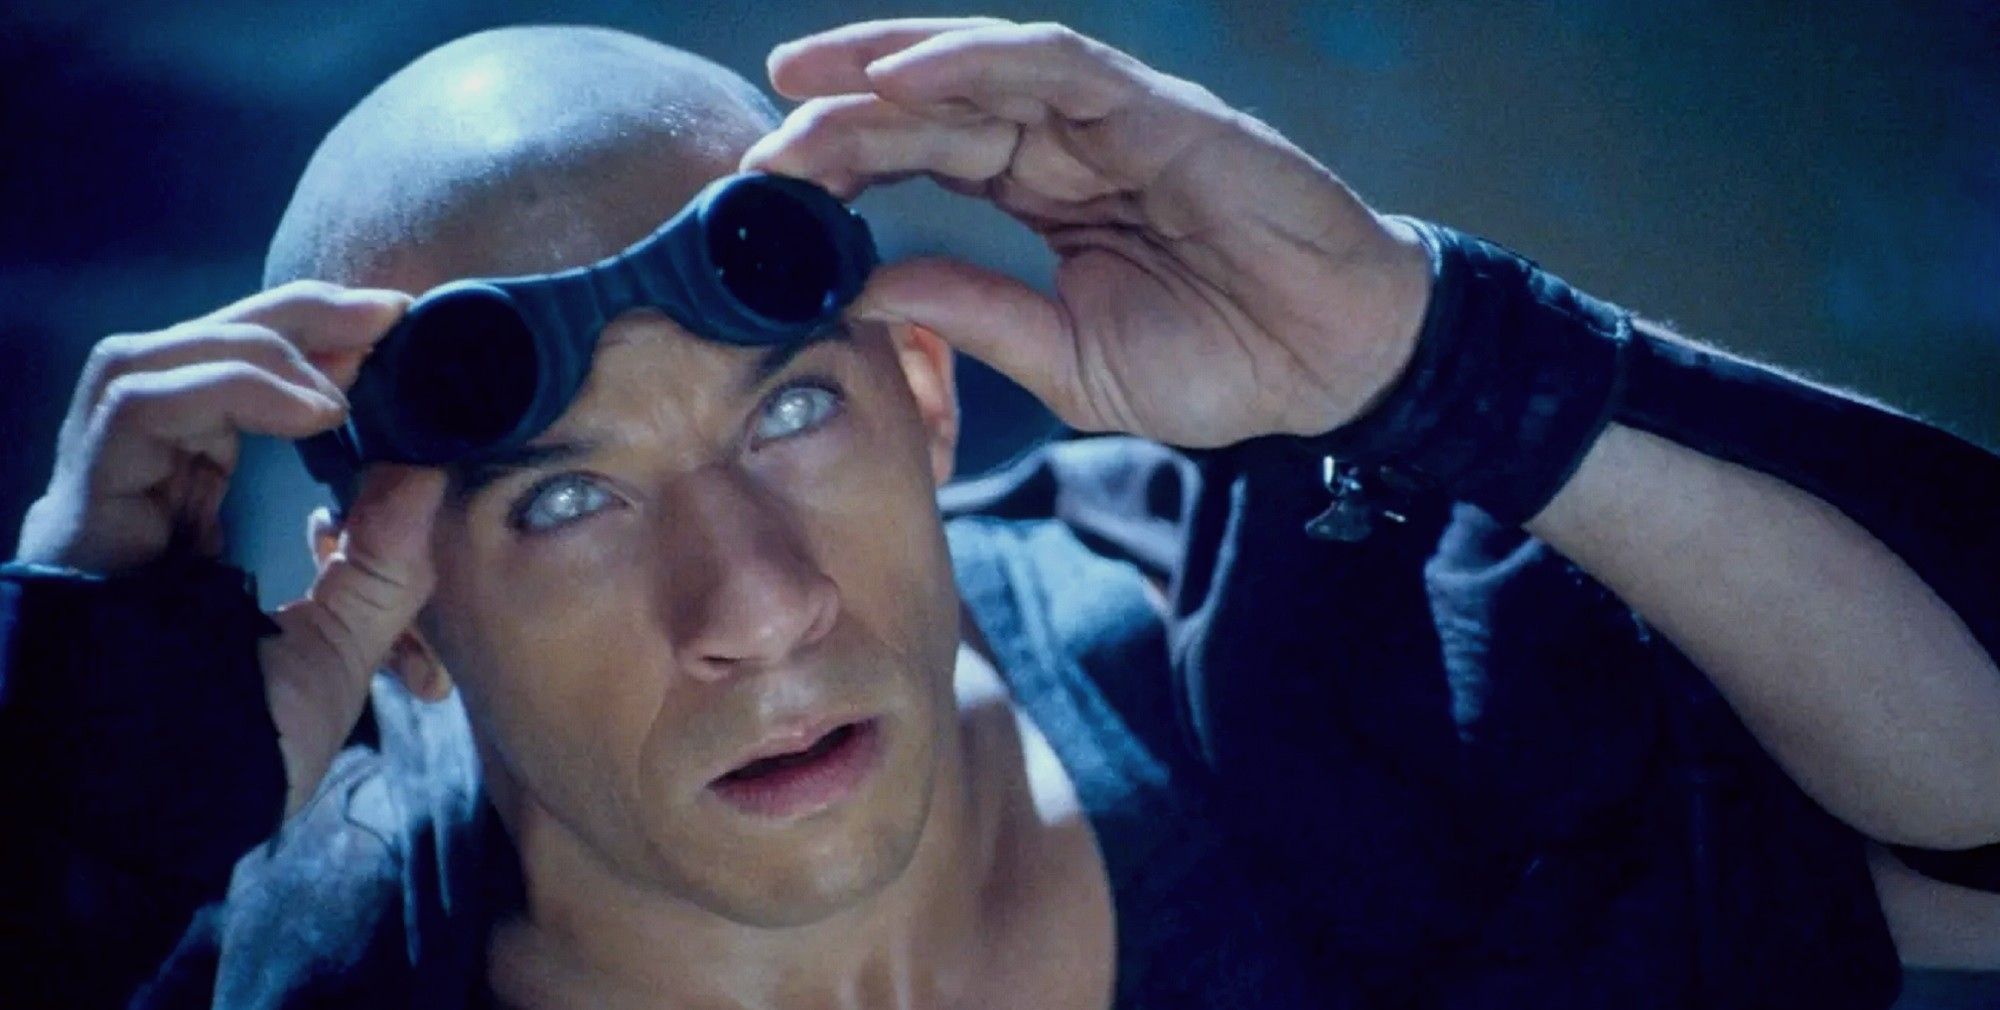 Pitch Black - Riddick looking up 